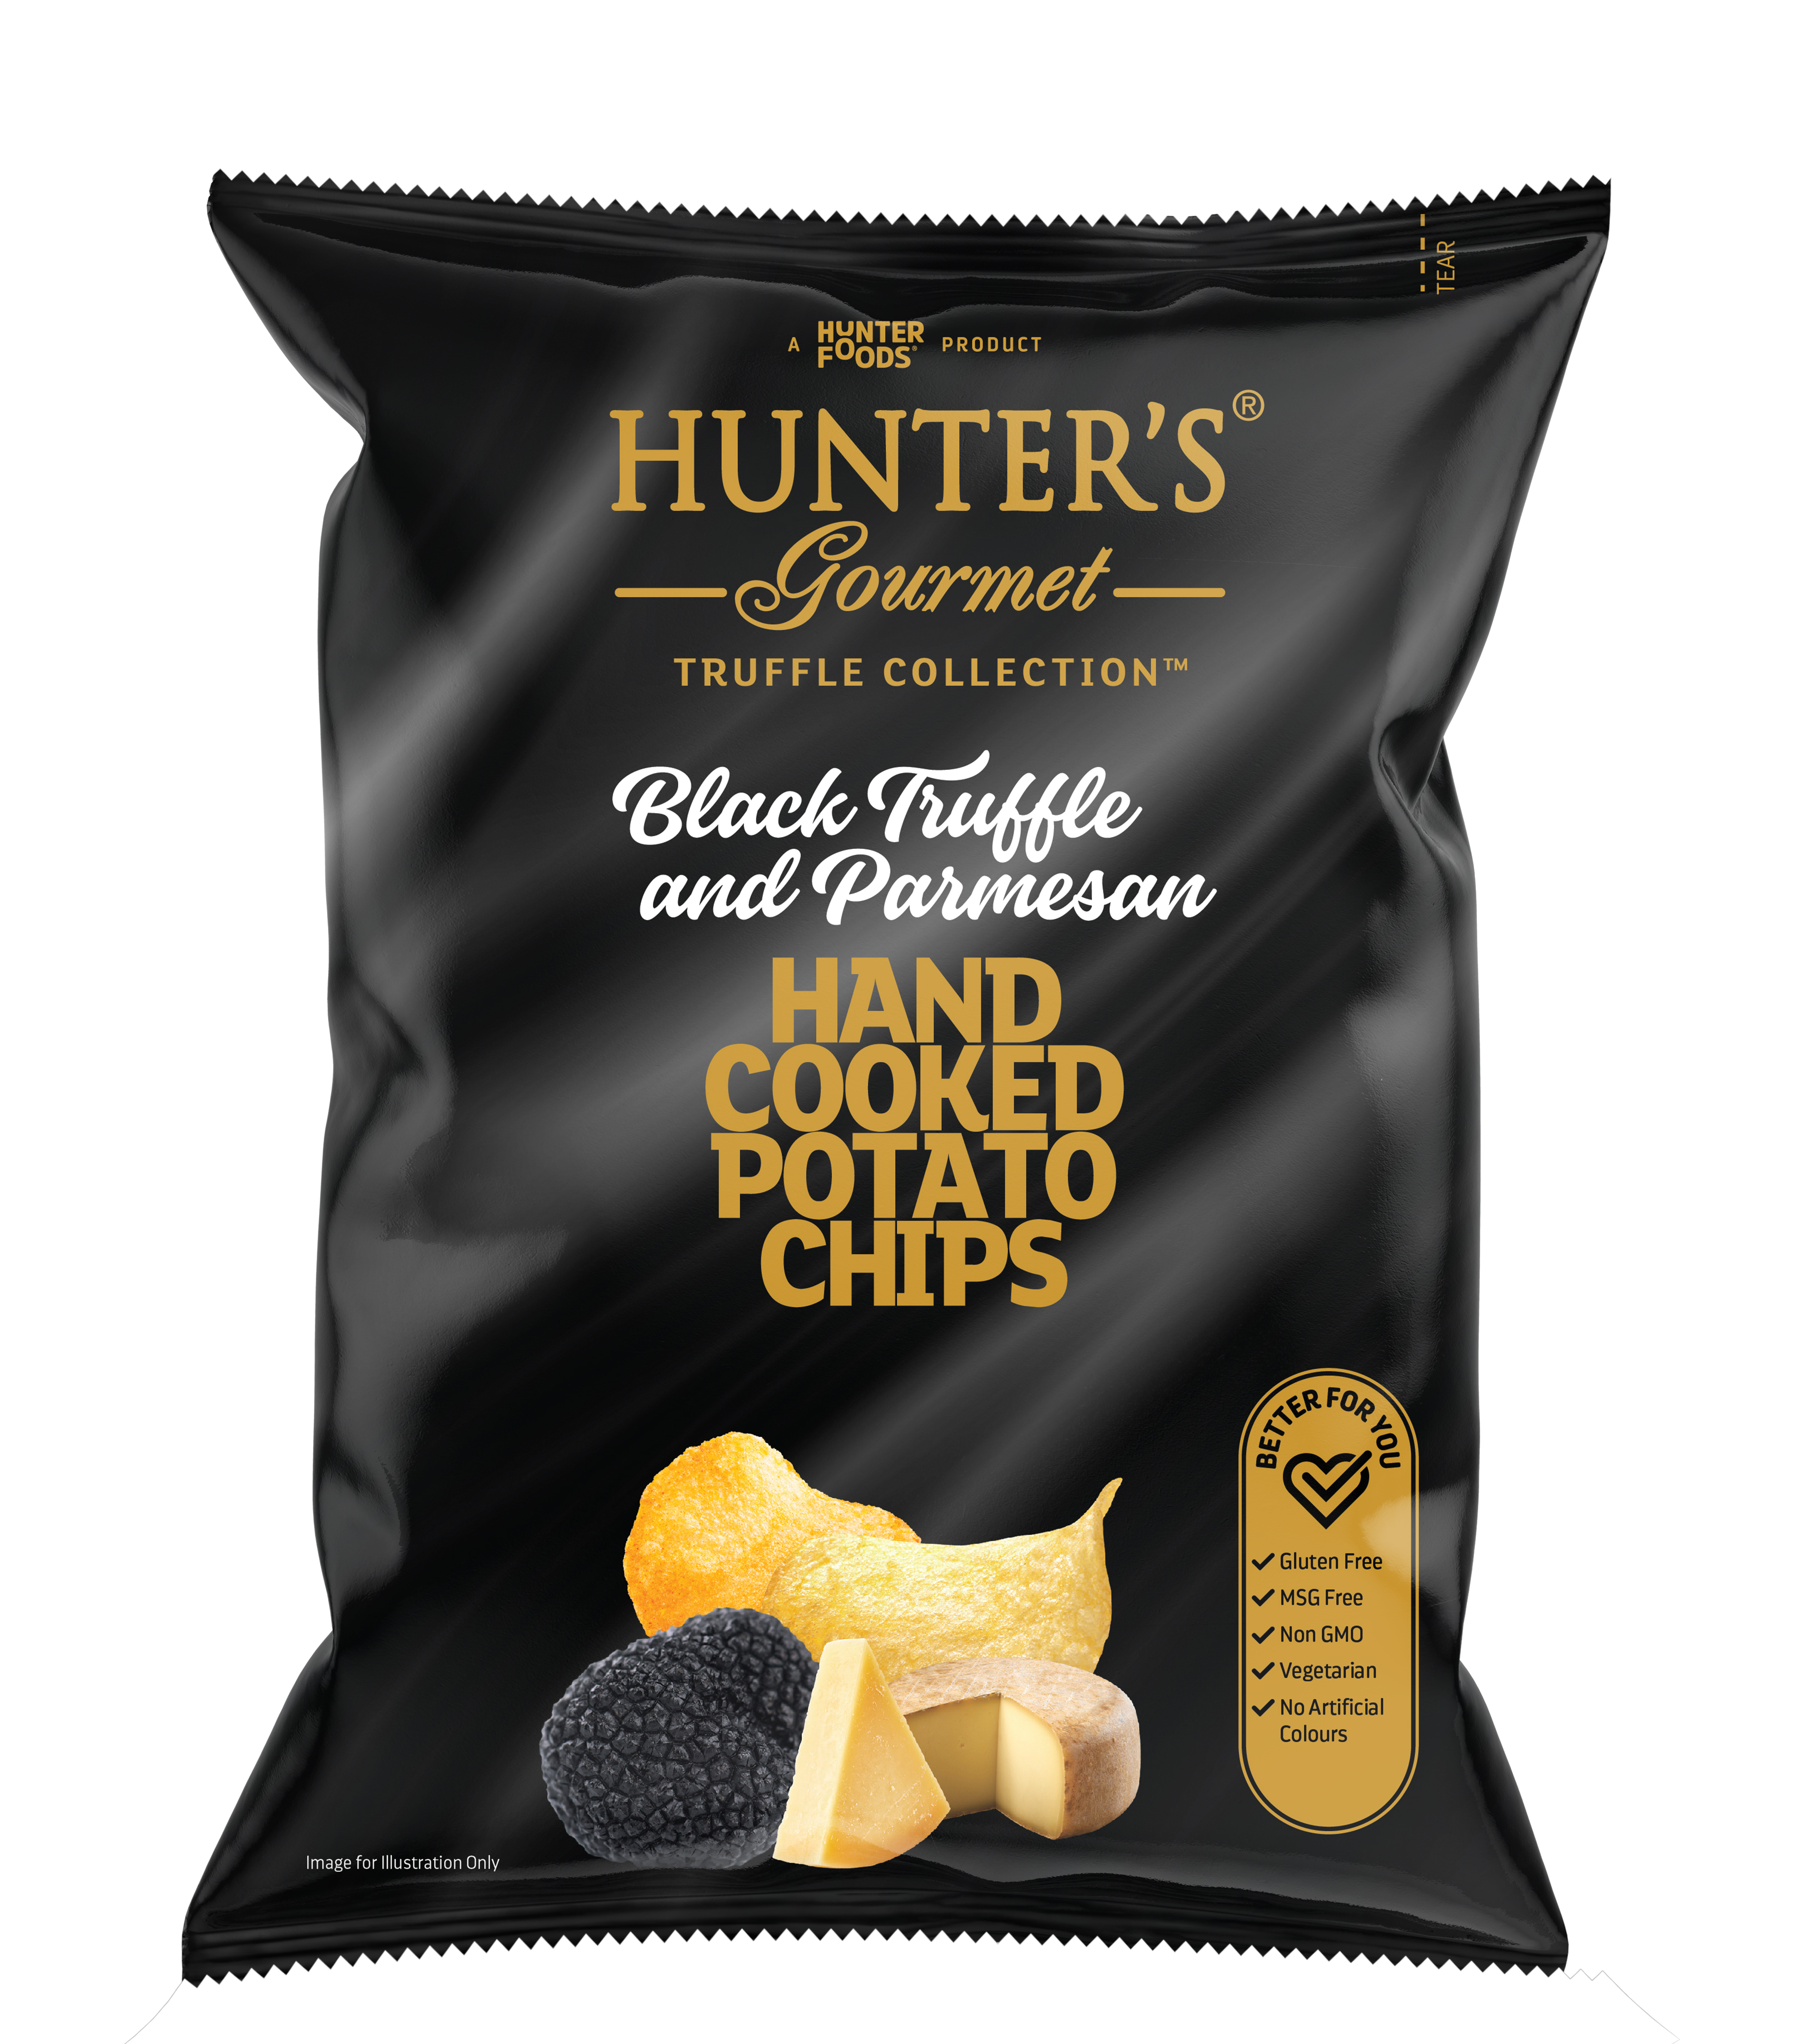 Hunter's Gourmet Hand Cooked Potato Chips Black Truffle and Parmesan 12 units per case 125 g